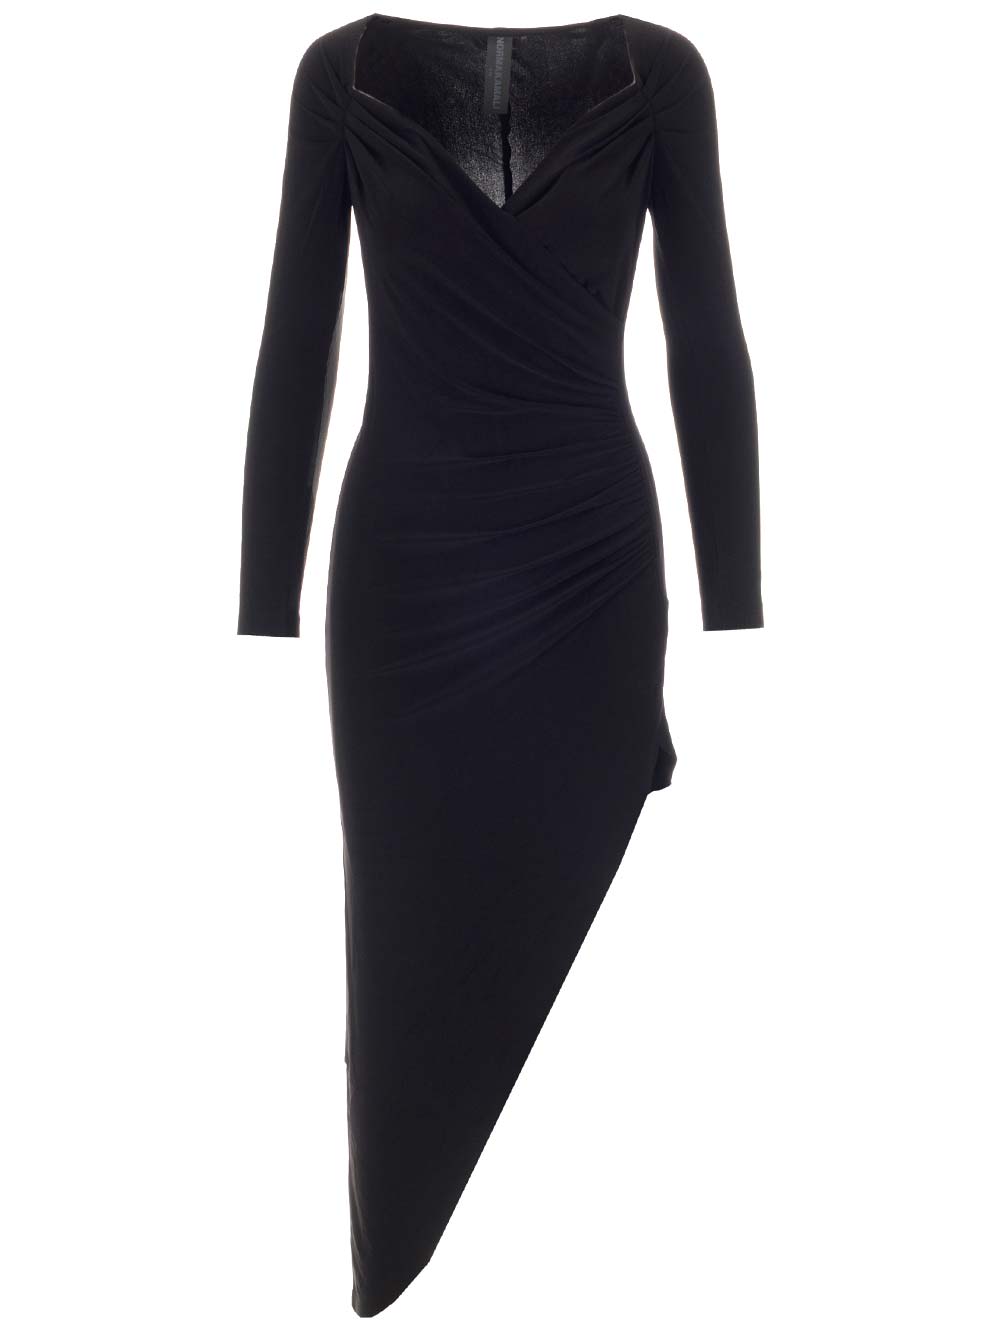 NORMA KAMALI BLACK DRESS IN JERSEY WITH SWEETHEART NECKLINE AND SIDE SLIT